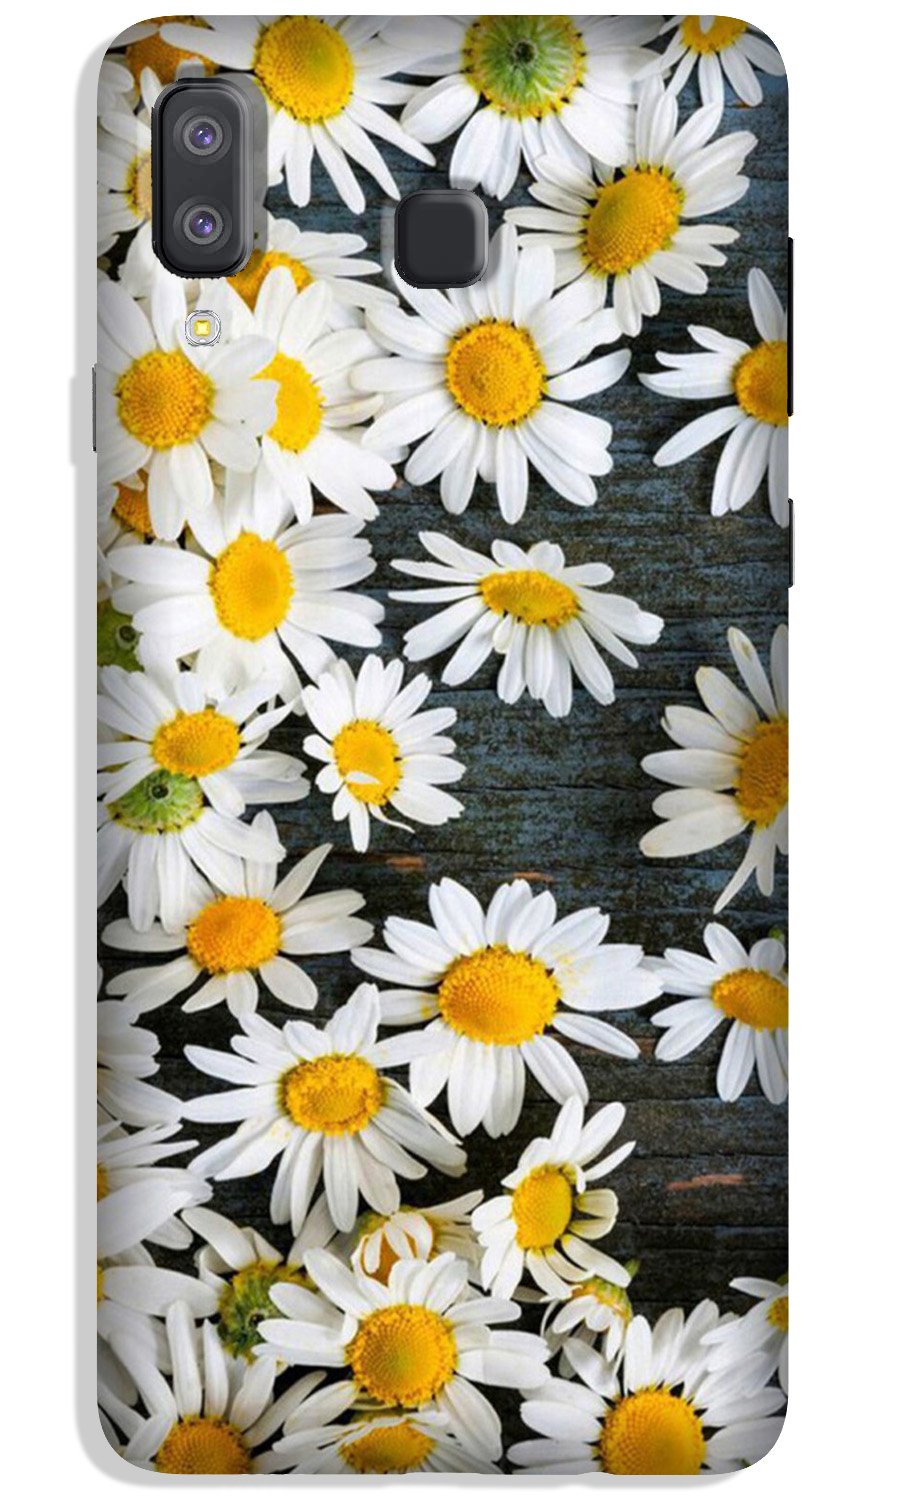 White flowers2 Case for Galaxy A8 Star